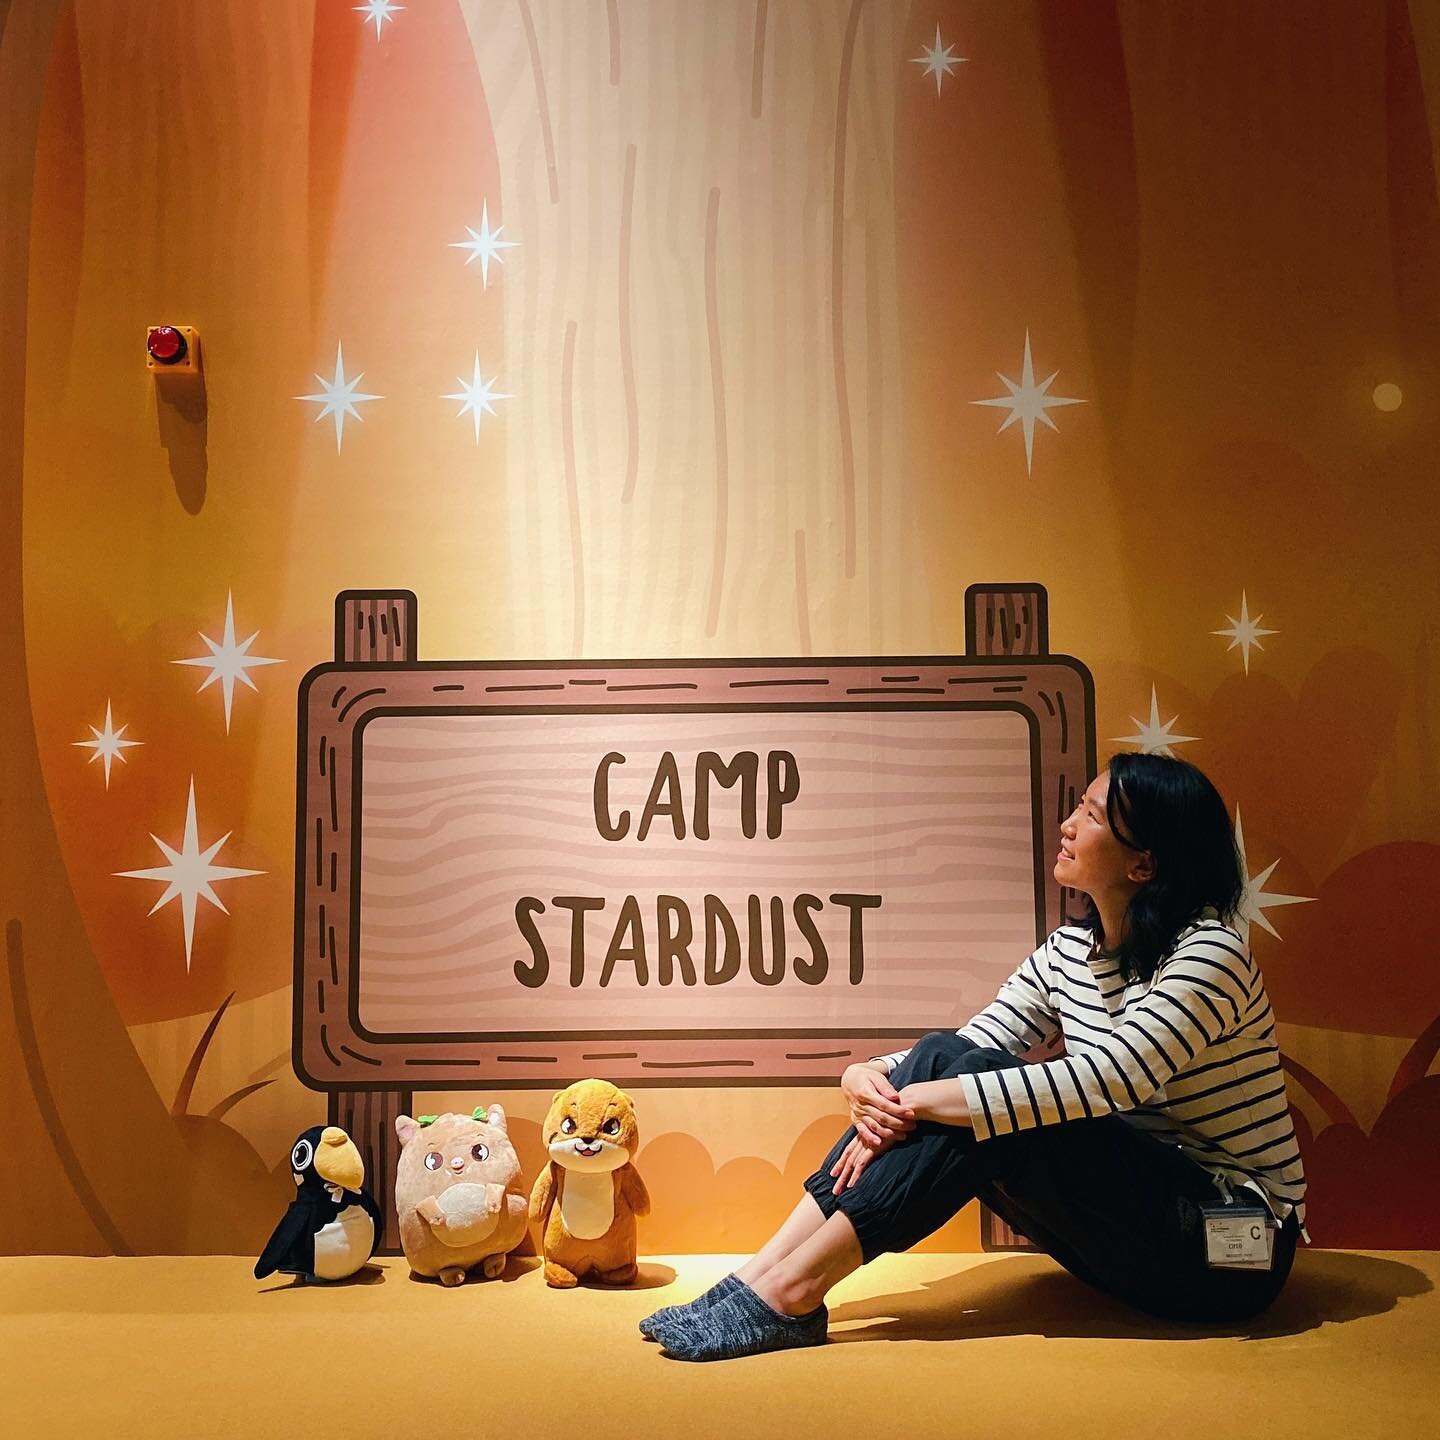 CAMP STARDUST ✨⛺️ photo taken right after our setup last year!

This week is the LAST WEEK to experience our well-loved escape room concept at The Centrepoint before we change up in the next few weeks 👀 #otahandfriends